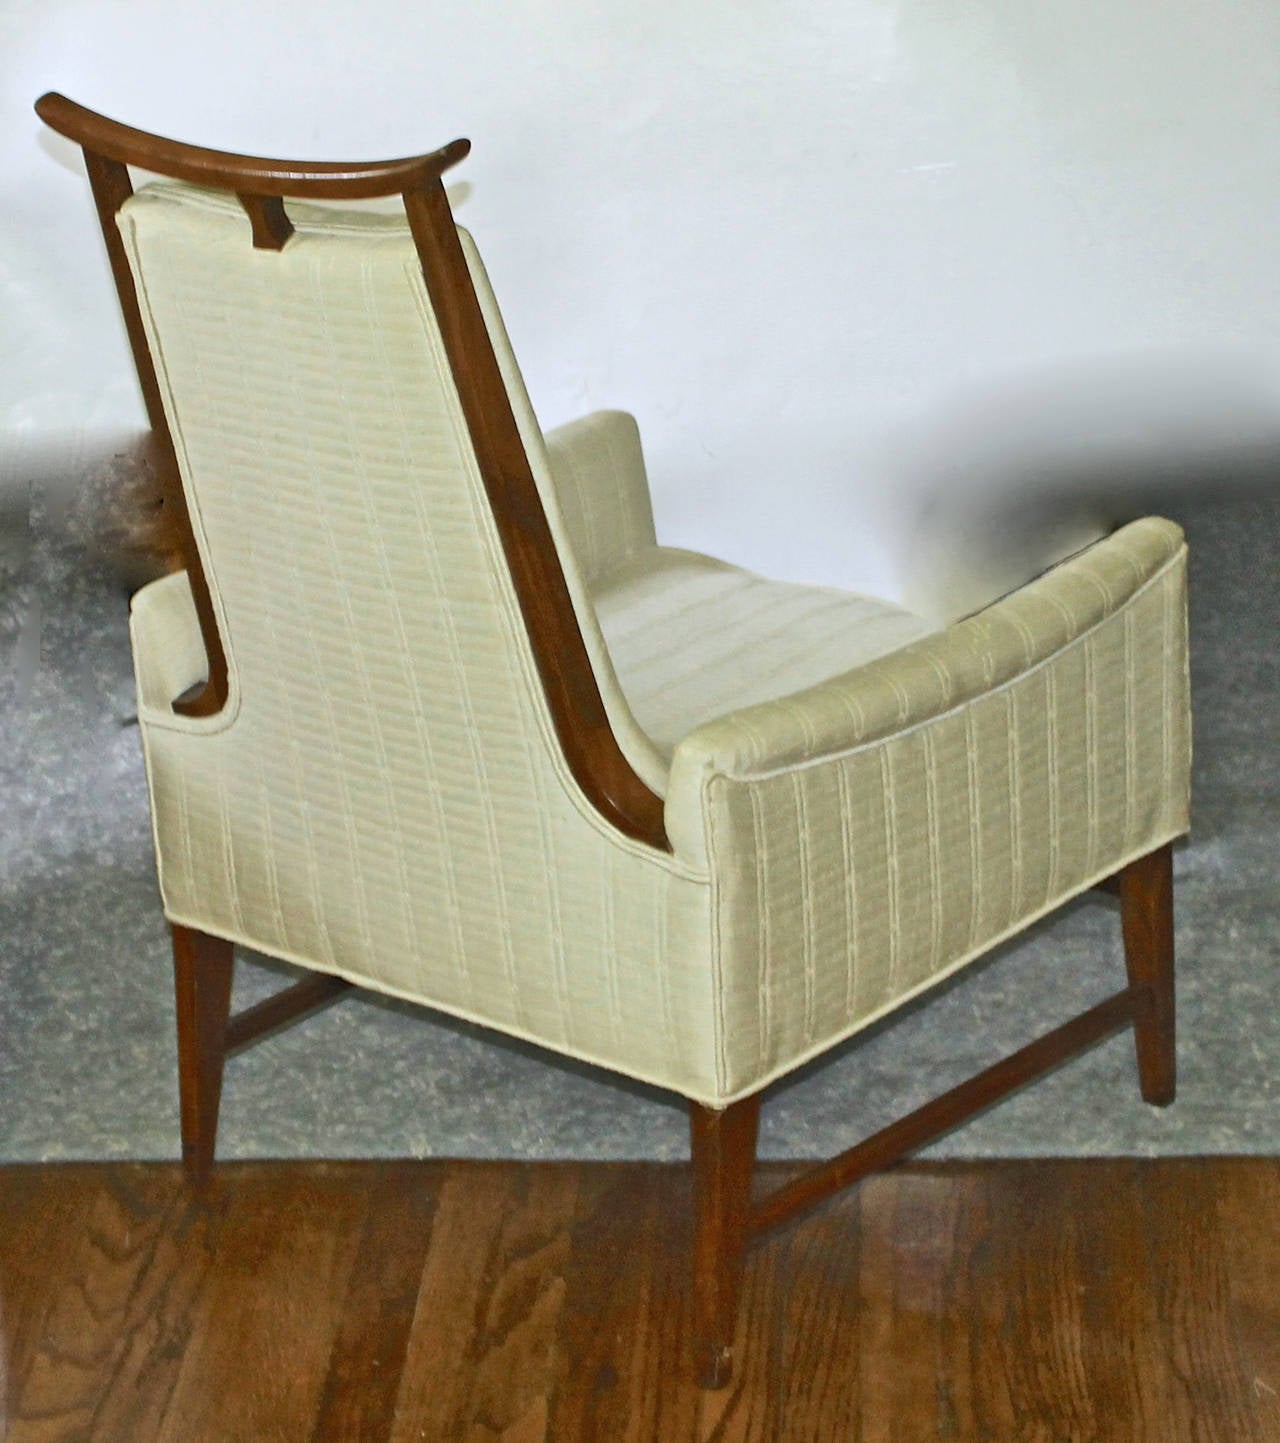 Upholstery Rare James Mont Style Asian Inspired Walnut Lounge Chairs